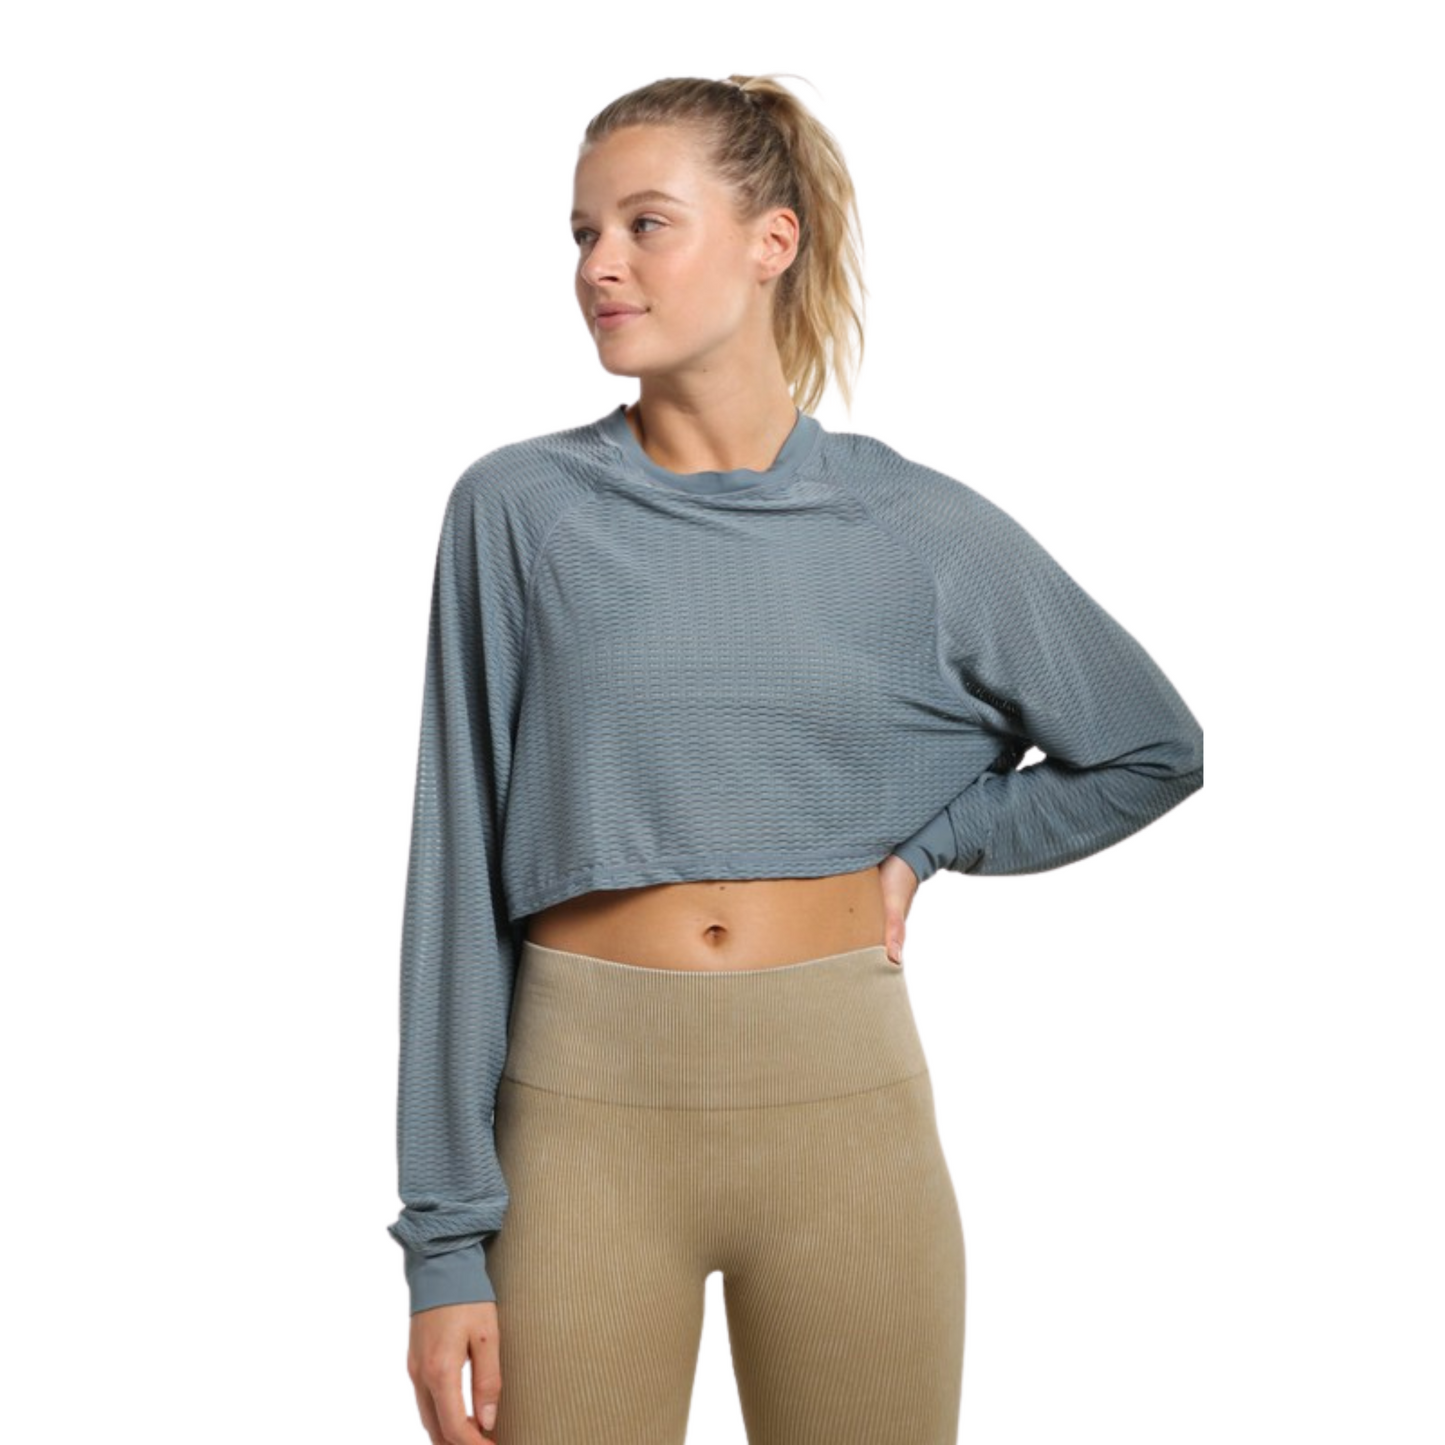 Our Mesh Raglan Cropped Top is a stylish addition to any wardrobe. This top comes in a cool sea green or mauve color with a cropped length and long sleeves. The breathable mesh fabric ensures all-day comfort.